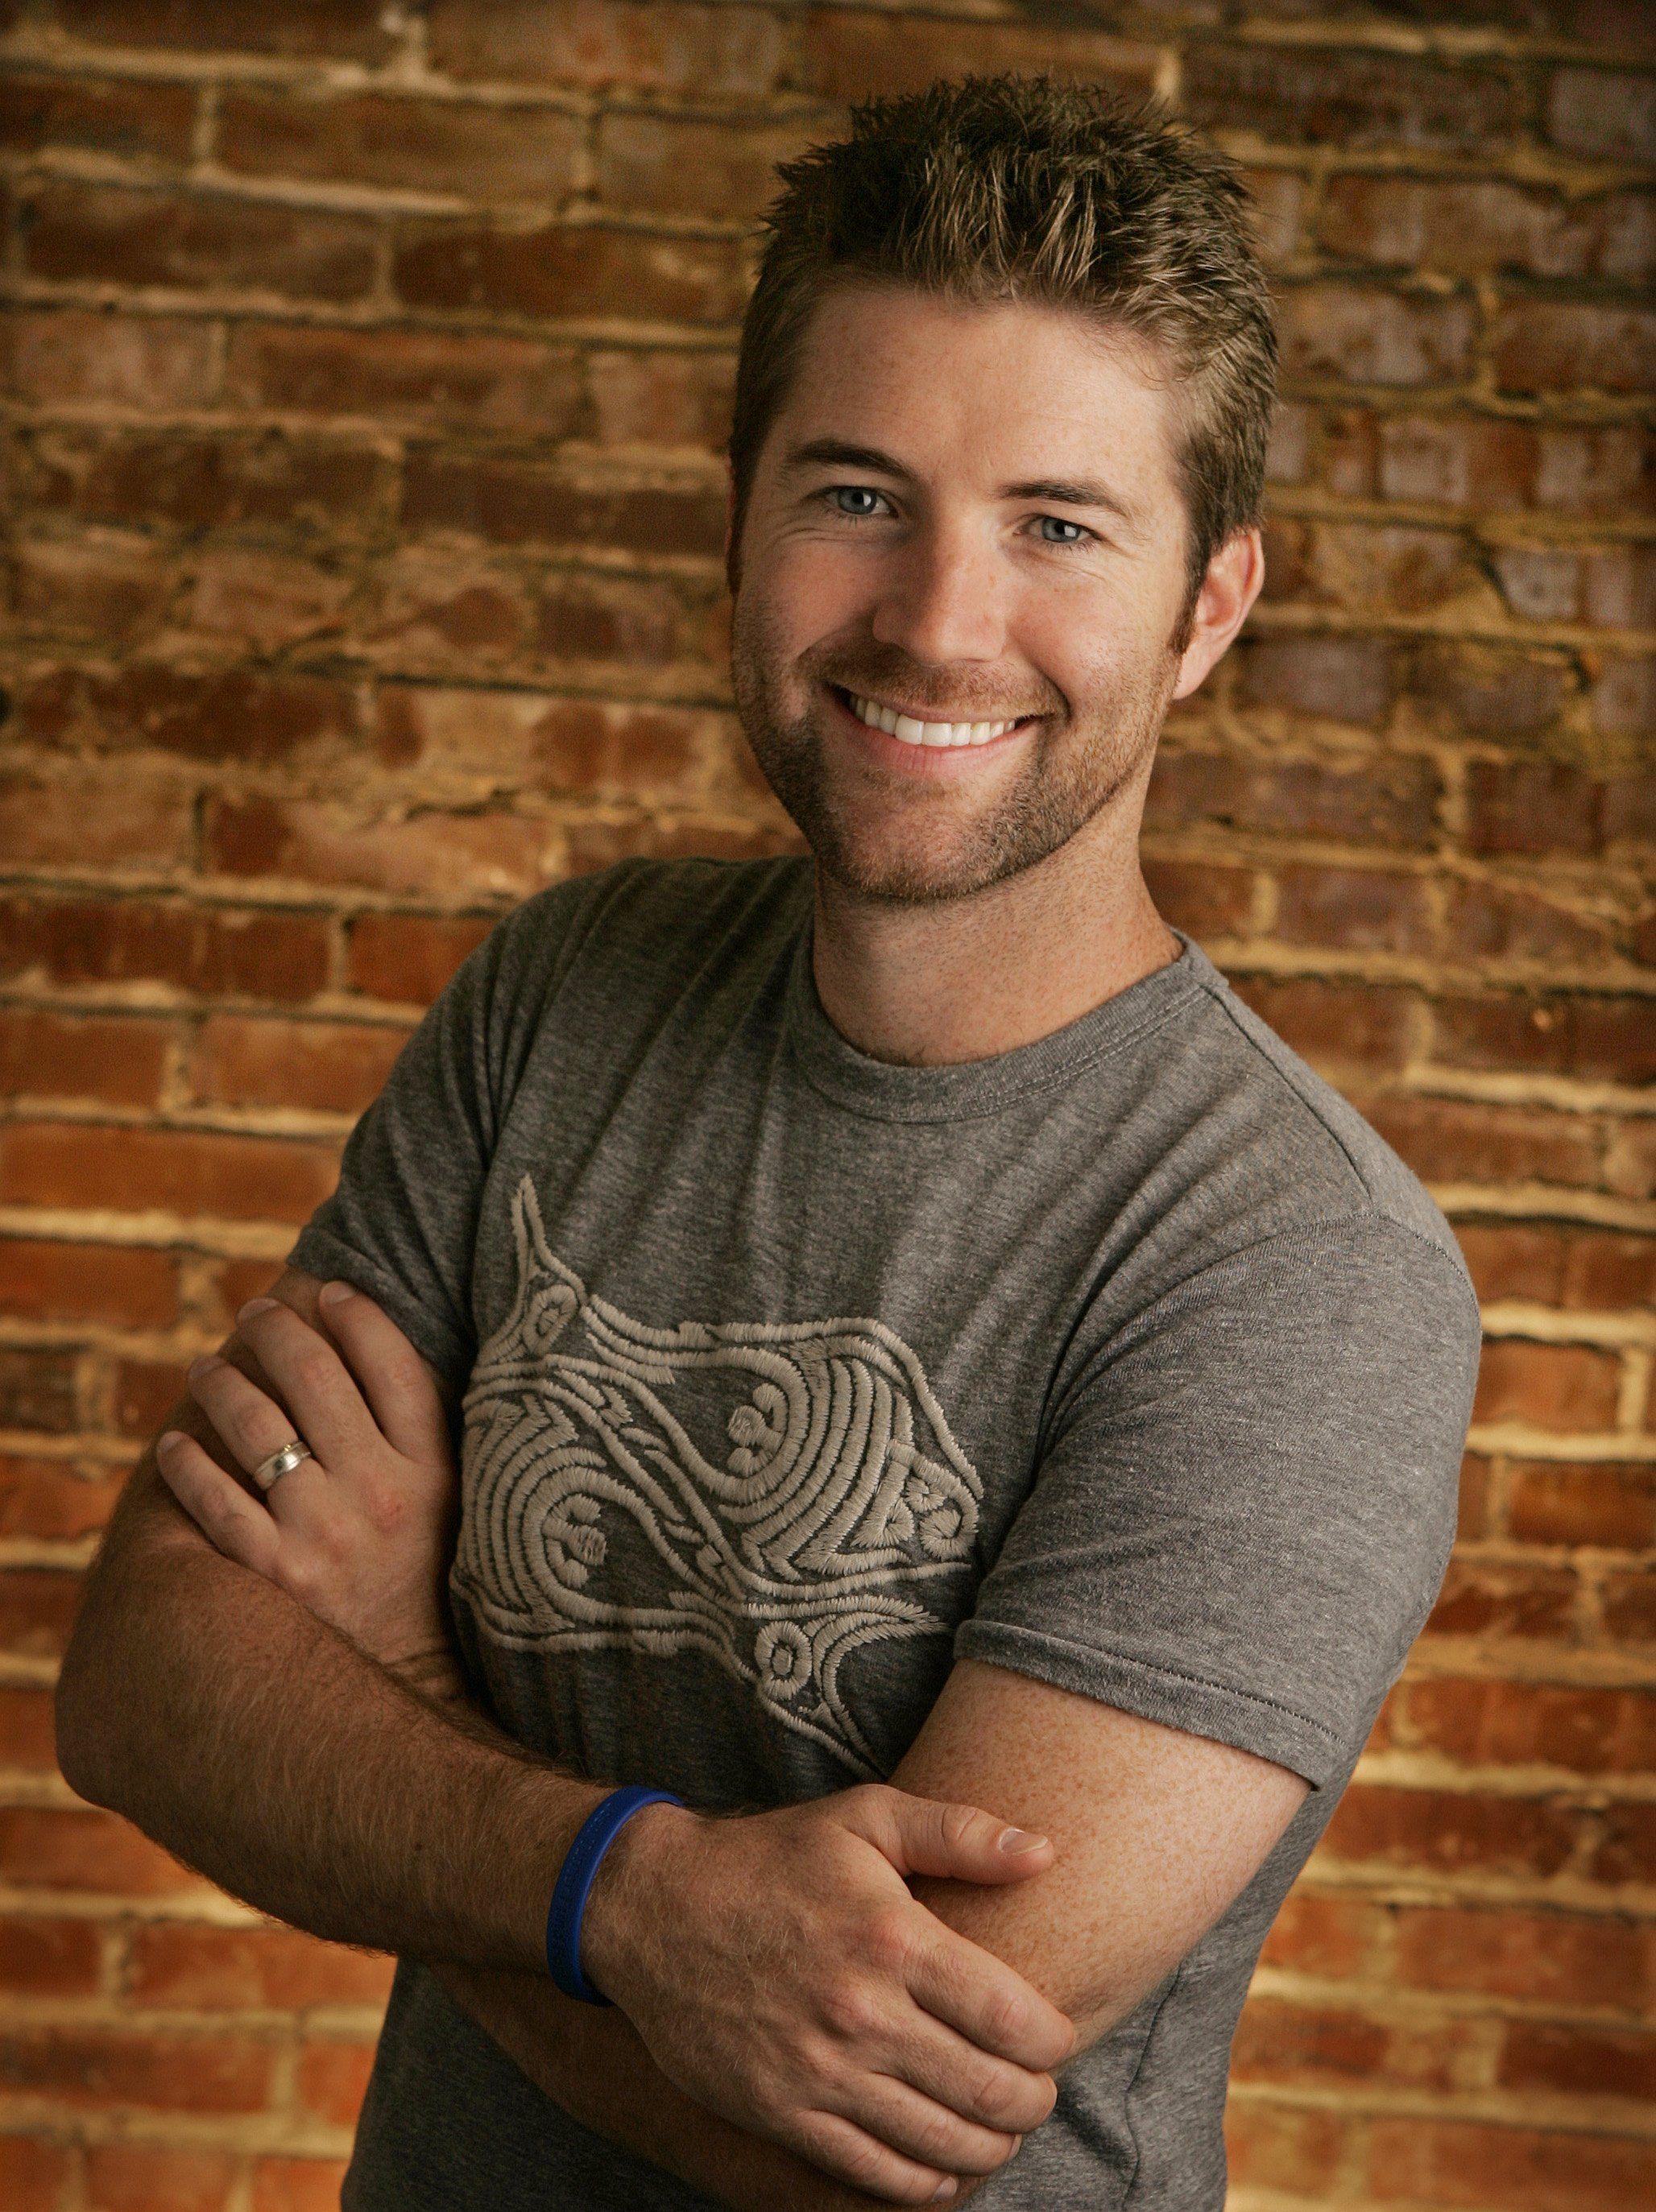 Josh Turner. The doors, Marry me and Chang'e 3